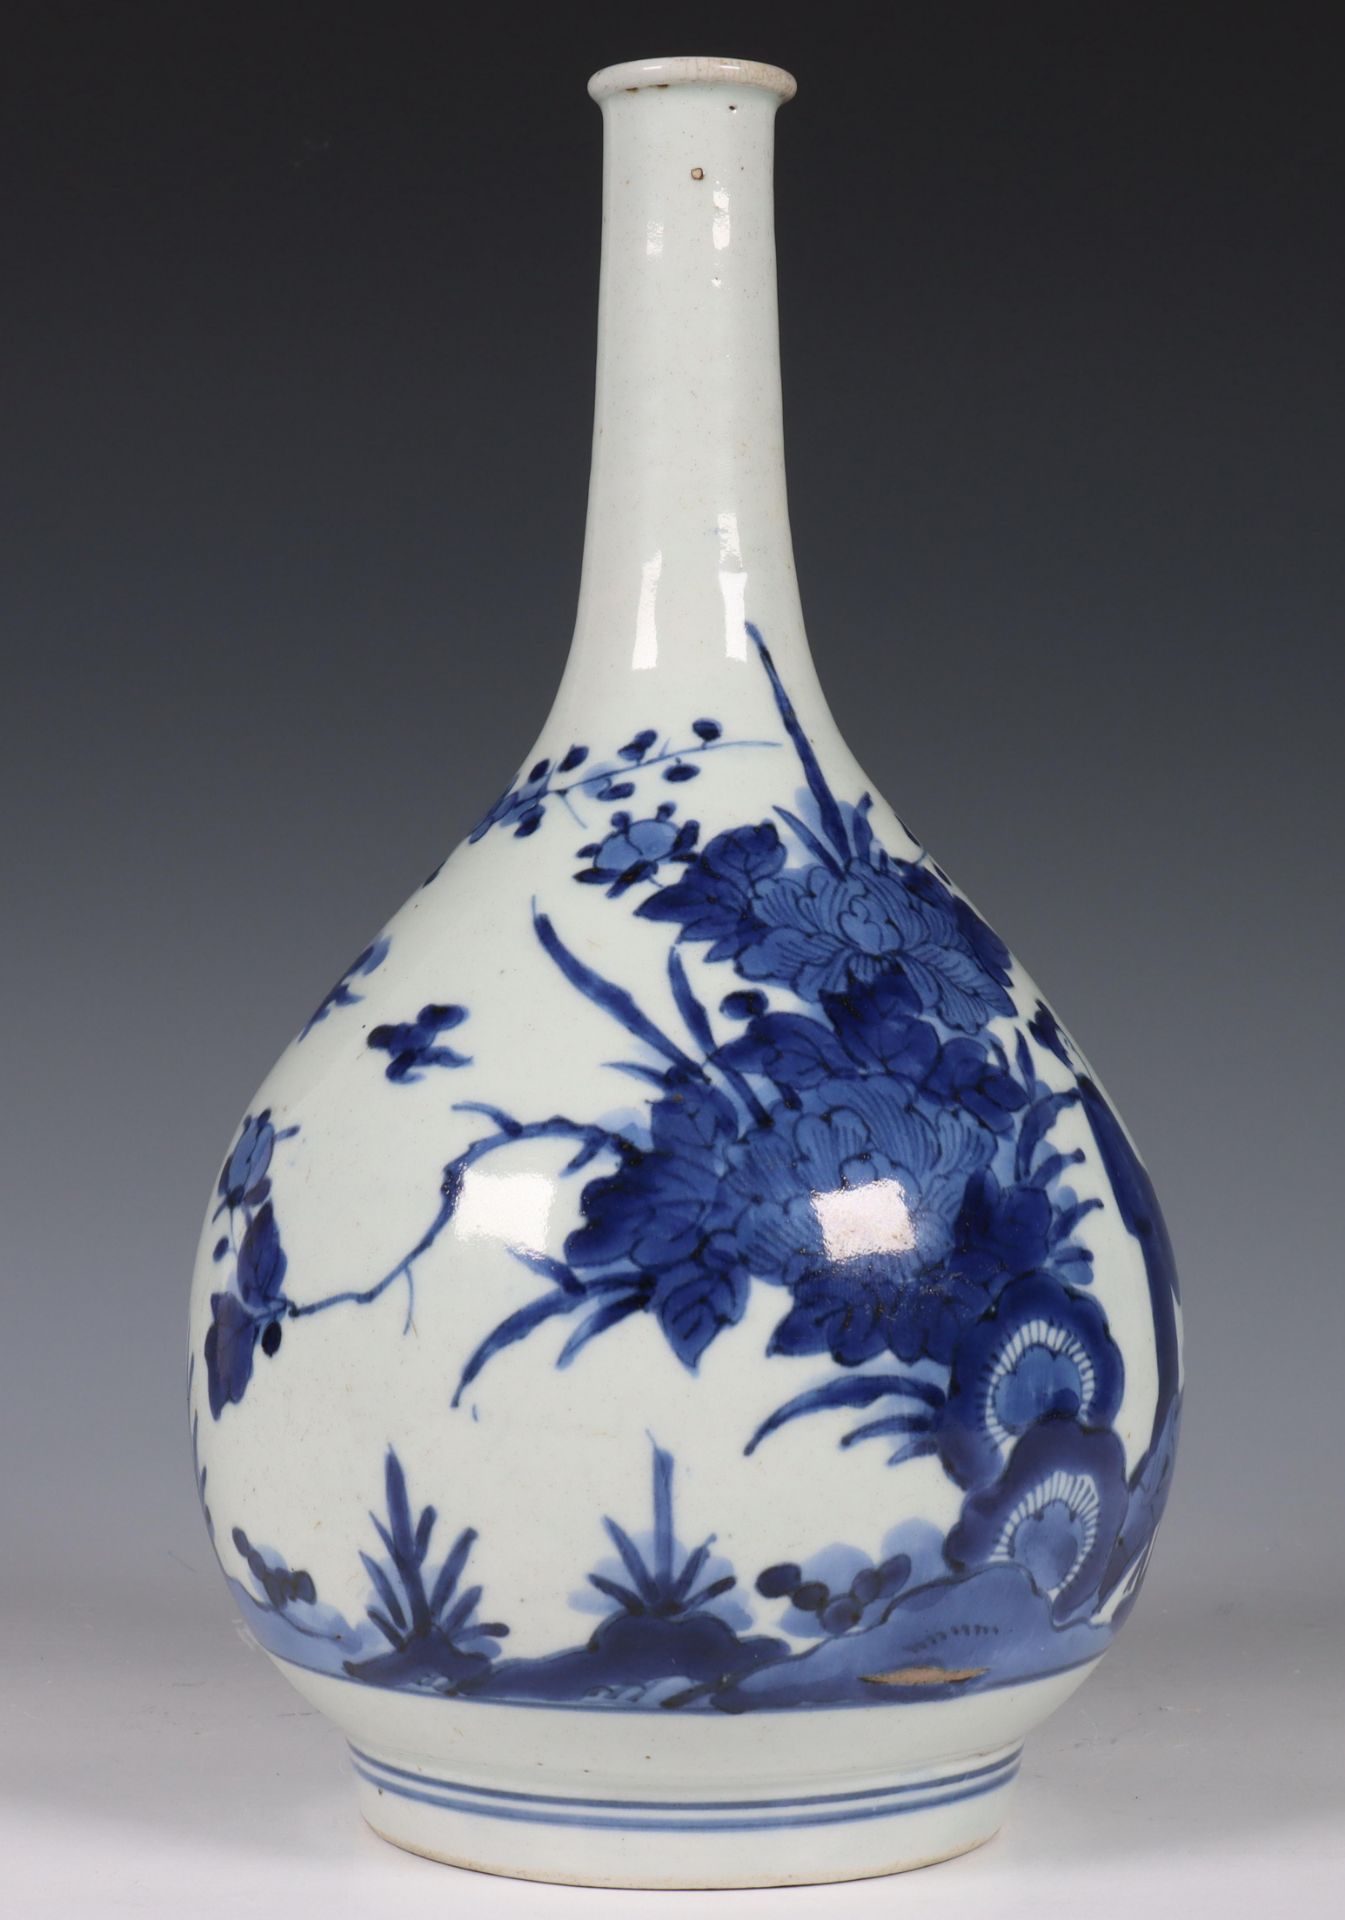 Japan, Arita blue and white porcelain bottle vase, Edo period, late 17th century, decorated with - Image 3 of 16